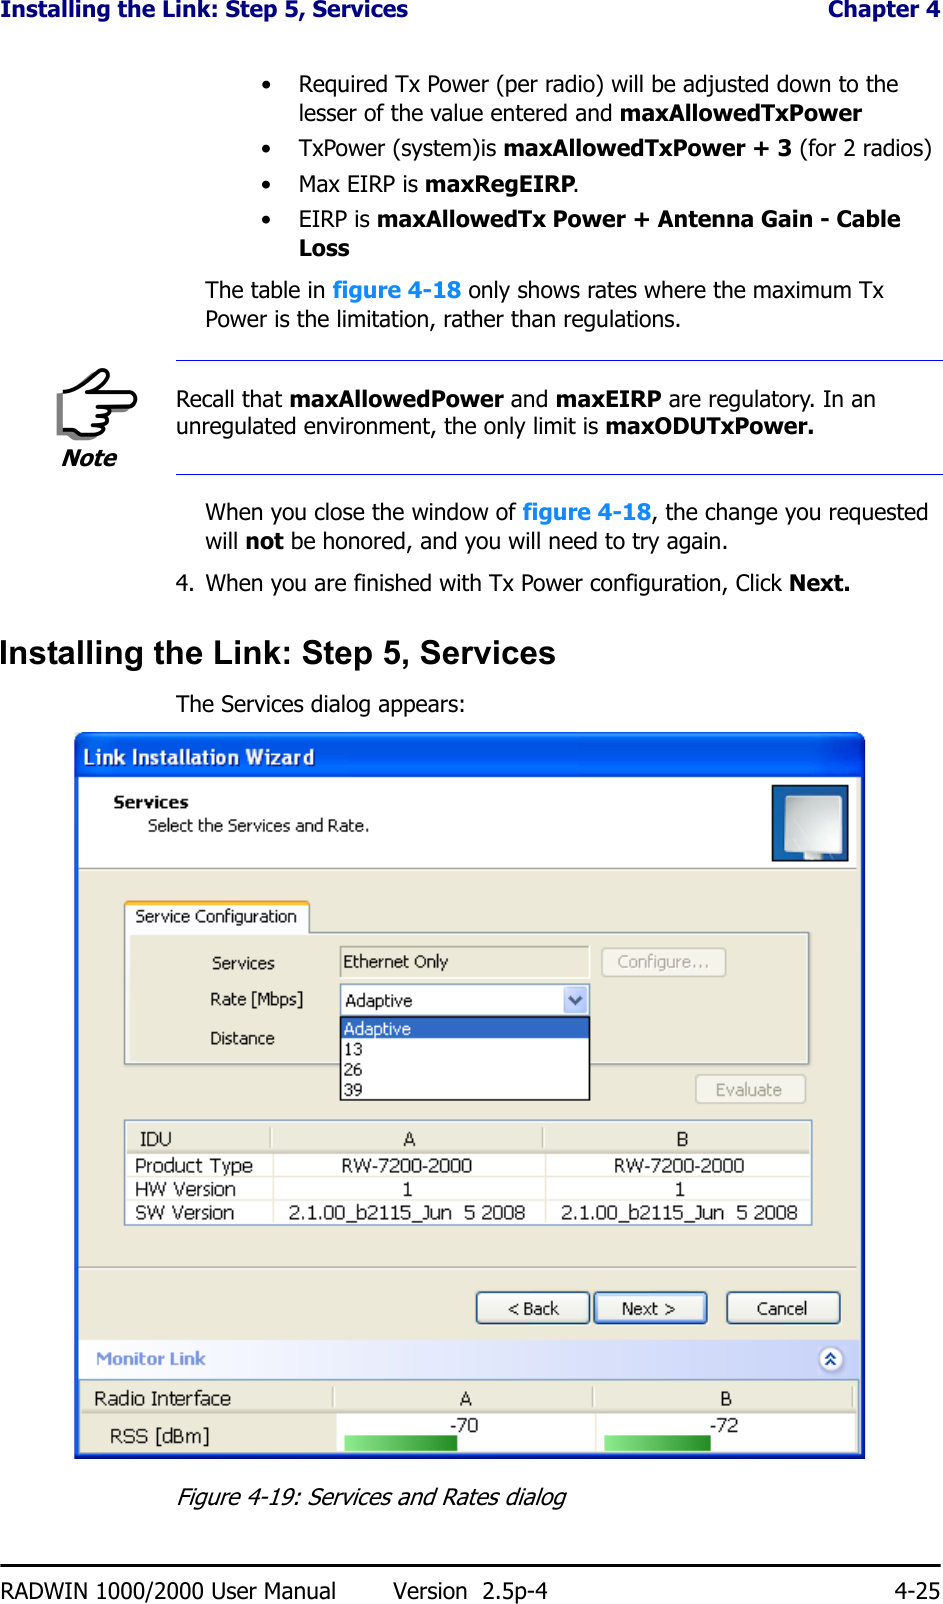 Installing the Link: Step 5, Services  Chapter 4RADWIN 1000/2000 User Manual Version  2.5p-4 4-25• Required Tx Power (per radio) will be adjusted down to the lesser of the value entered and maxAllowedTxPower•TxPower (system)is maxAllowedTxPower + 3 (for 2 radios)•Max EIRP is maxRegEIRP.•EIRP is maxAllowedTx Power + Antenna Gain - Cable LossThe table in figure 4-18 only shows rates where the maximum Tx Power is the limitation, rather than regulations.When you close the window of figure 4-18, the change you requested will not be honored, and you will need to try again.4. When you are finished with Tx Power configuration, Click Next.Installing the Link: Step 5, ServicesThe Services dialog appears:Figure 4-19: Services and Rates dialogNoteRecall that maxAllowedPower and maxEIRP are regulatory. In an unregulated environment, the only limit is maxODUTxPower.